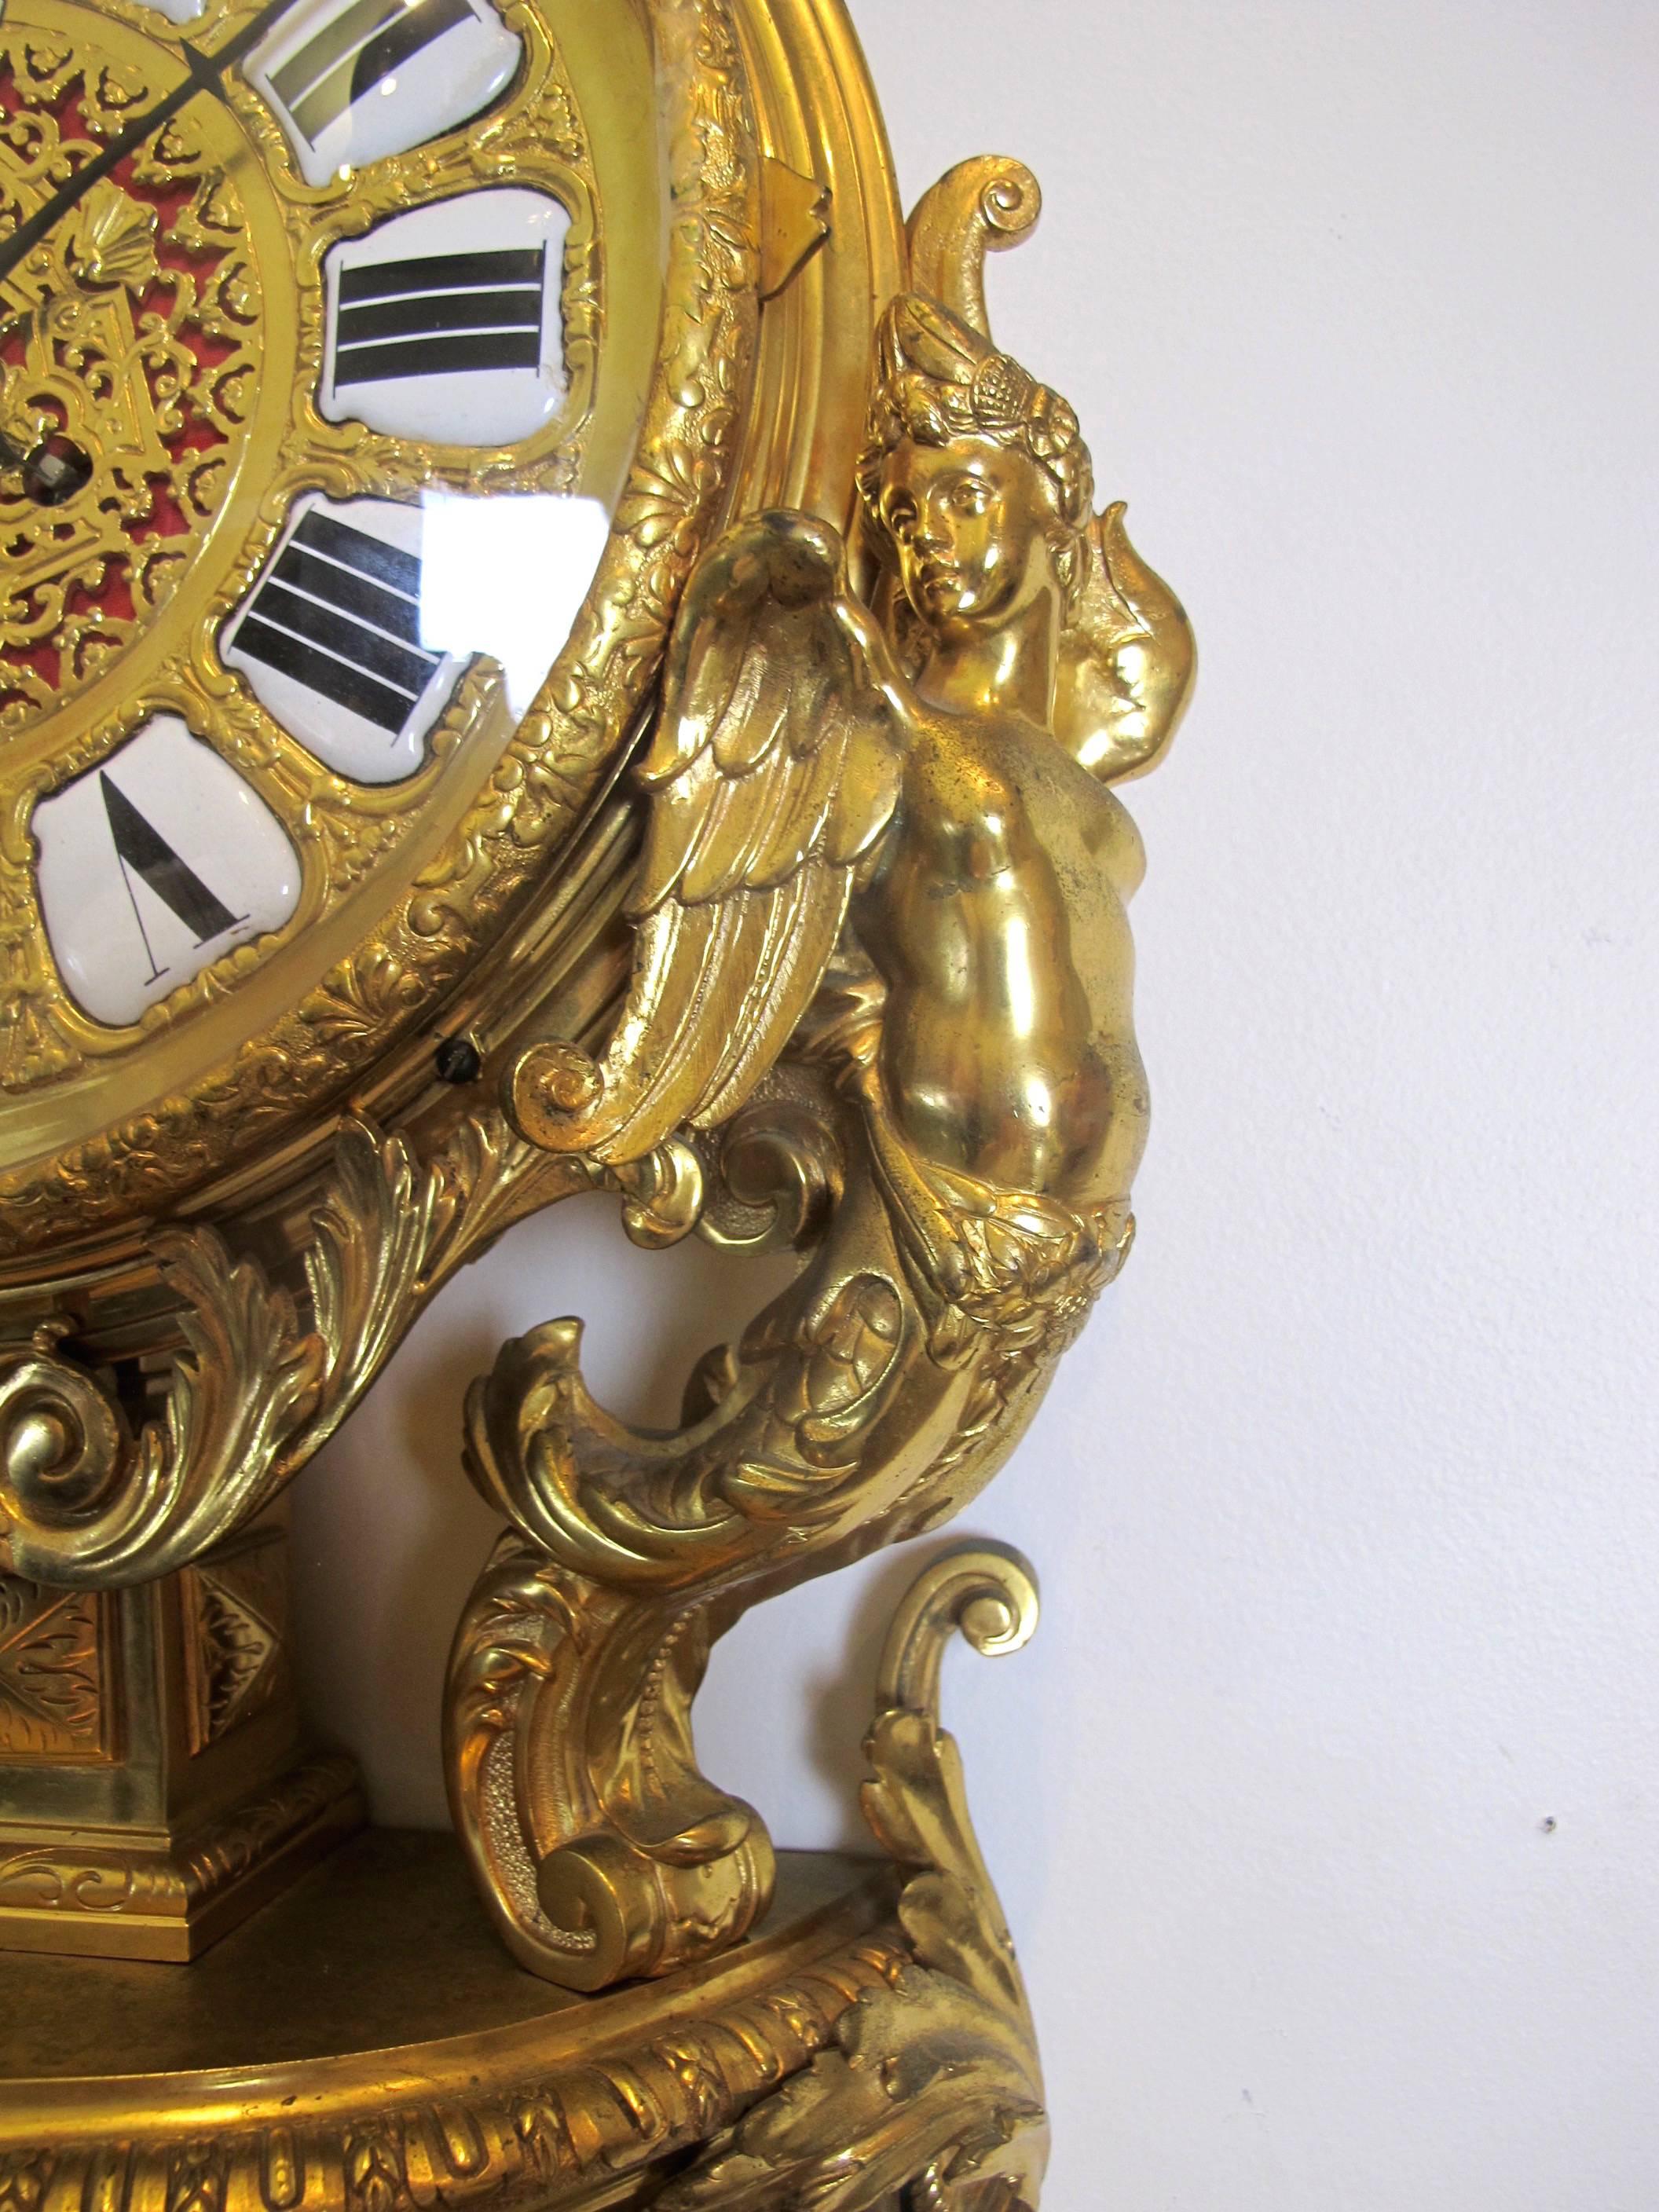 Lerolle Freres Gilt Bronze Louis XVI Style Wall Clock, 19th Century For Sale 4